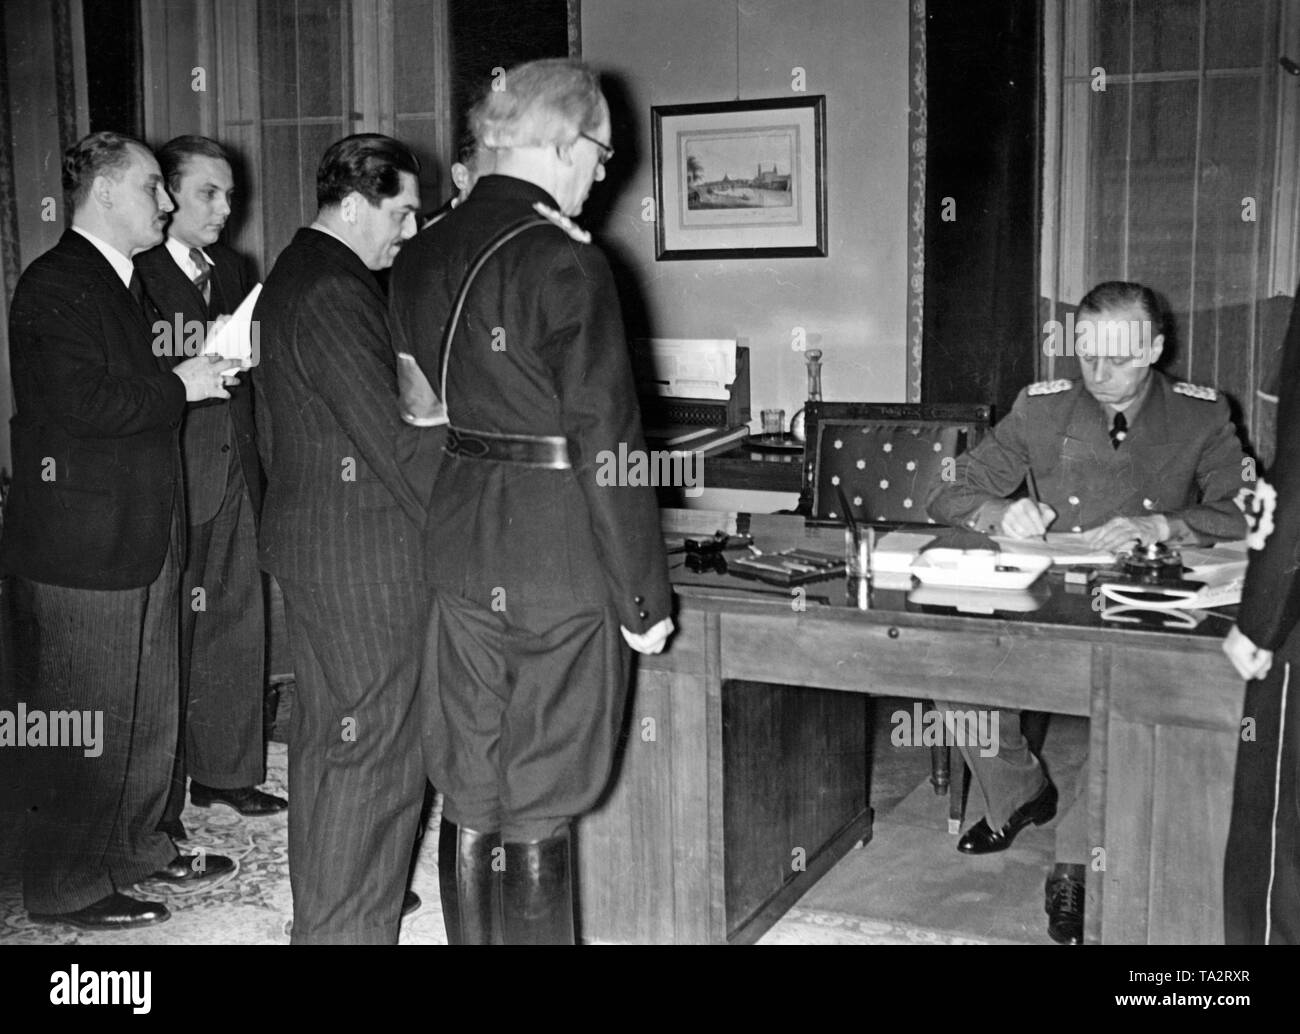 Joachim von Ribbentrop (right) signs the German-Slovakian Protection Treaty. At the desk stand the Slovak Prime Minister Vojtech Tuka (2nd from right) and Minister Ferdinand Durcansky (3rd from right). In March 1939, the Slovak state became independent under Hitler's pressure. The treaty is signed at the Foreign Office in Berlin. Stock Photo